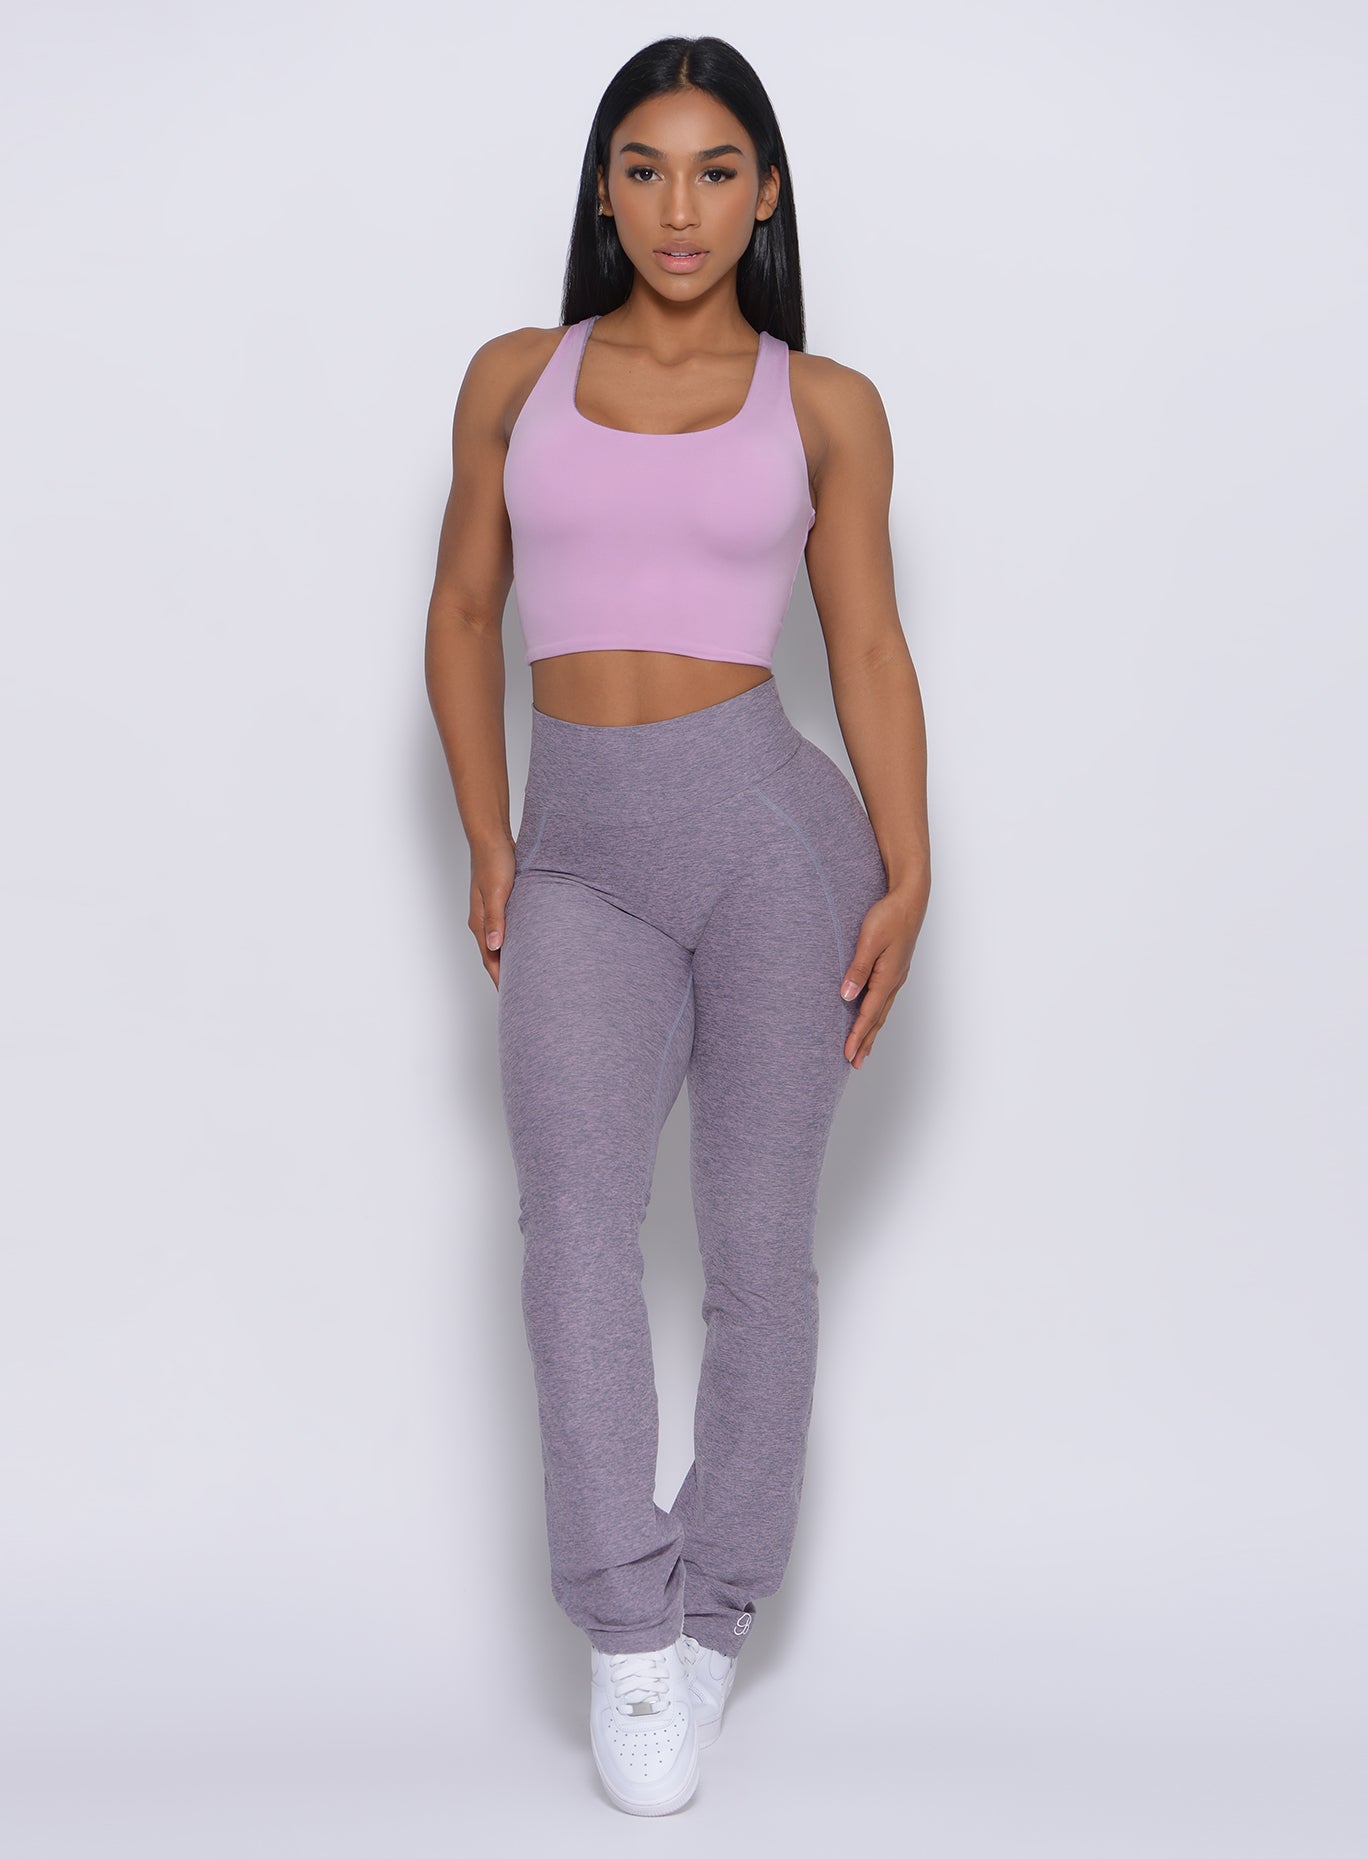 Front profile view of a model in our straight up leggings in orchid color and a bra in blush color